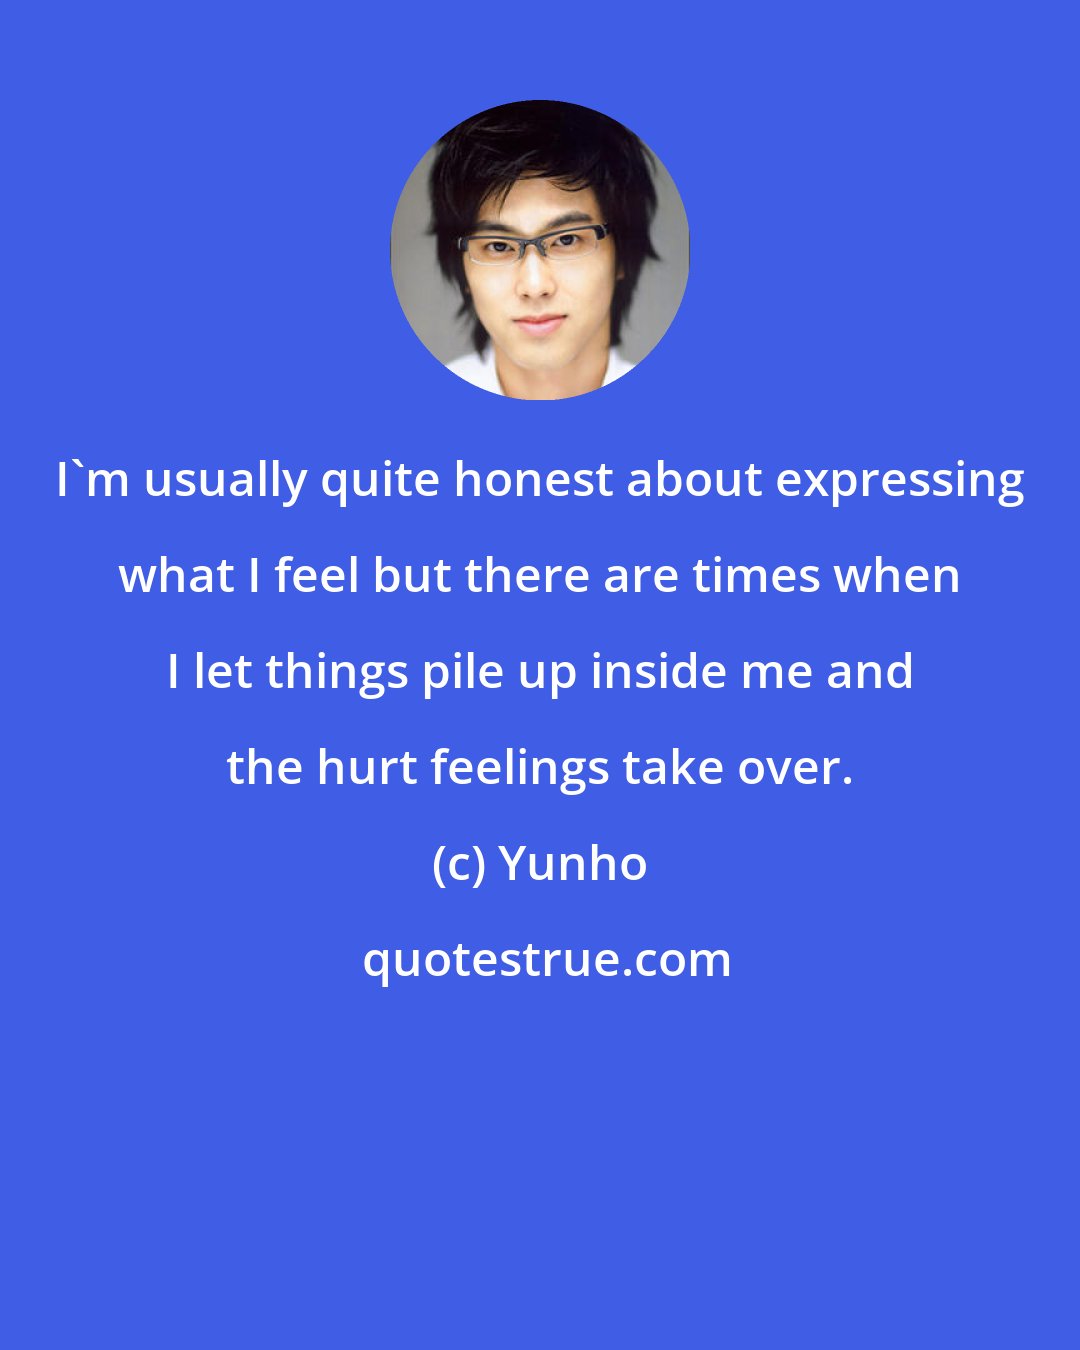 Yunho: I'm usually quite honest about expressing what I feel but there are times when I let things pile up inside me and the hurt feelings take over.